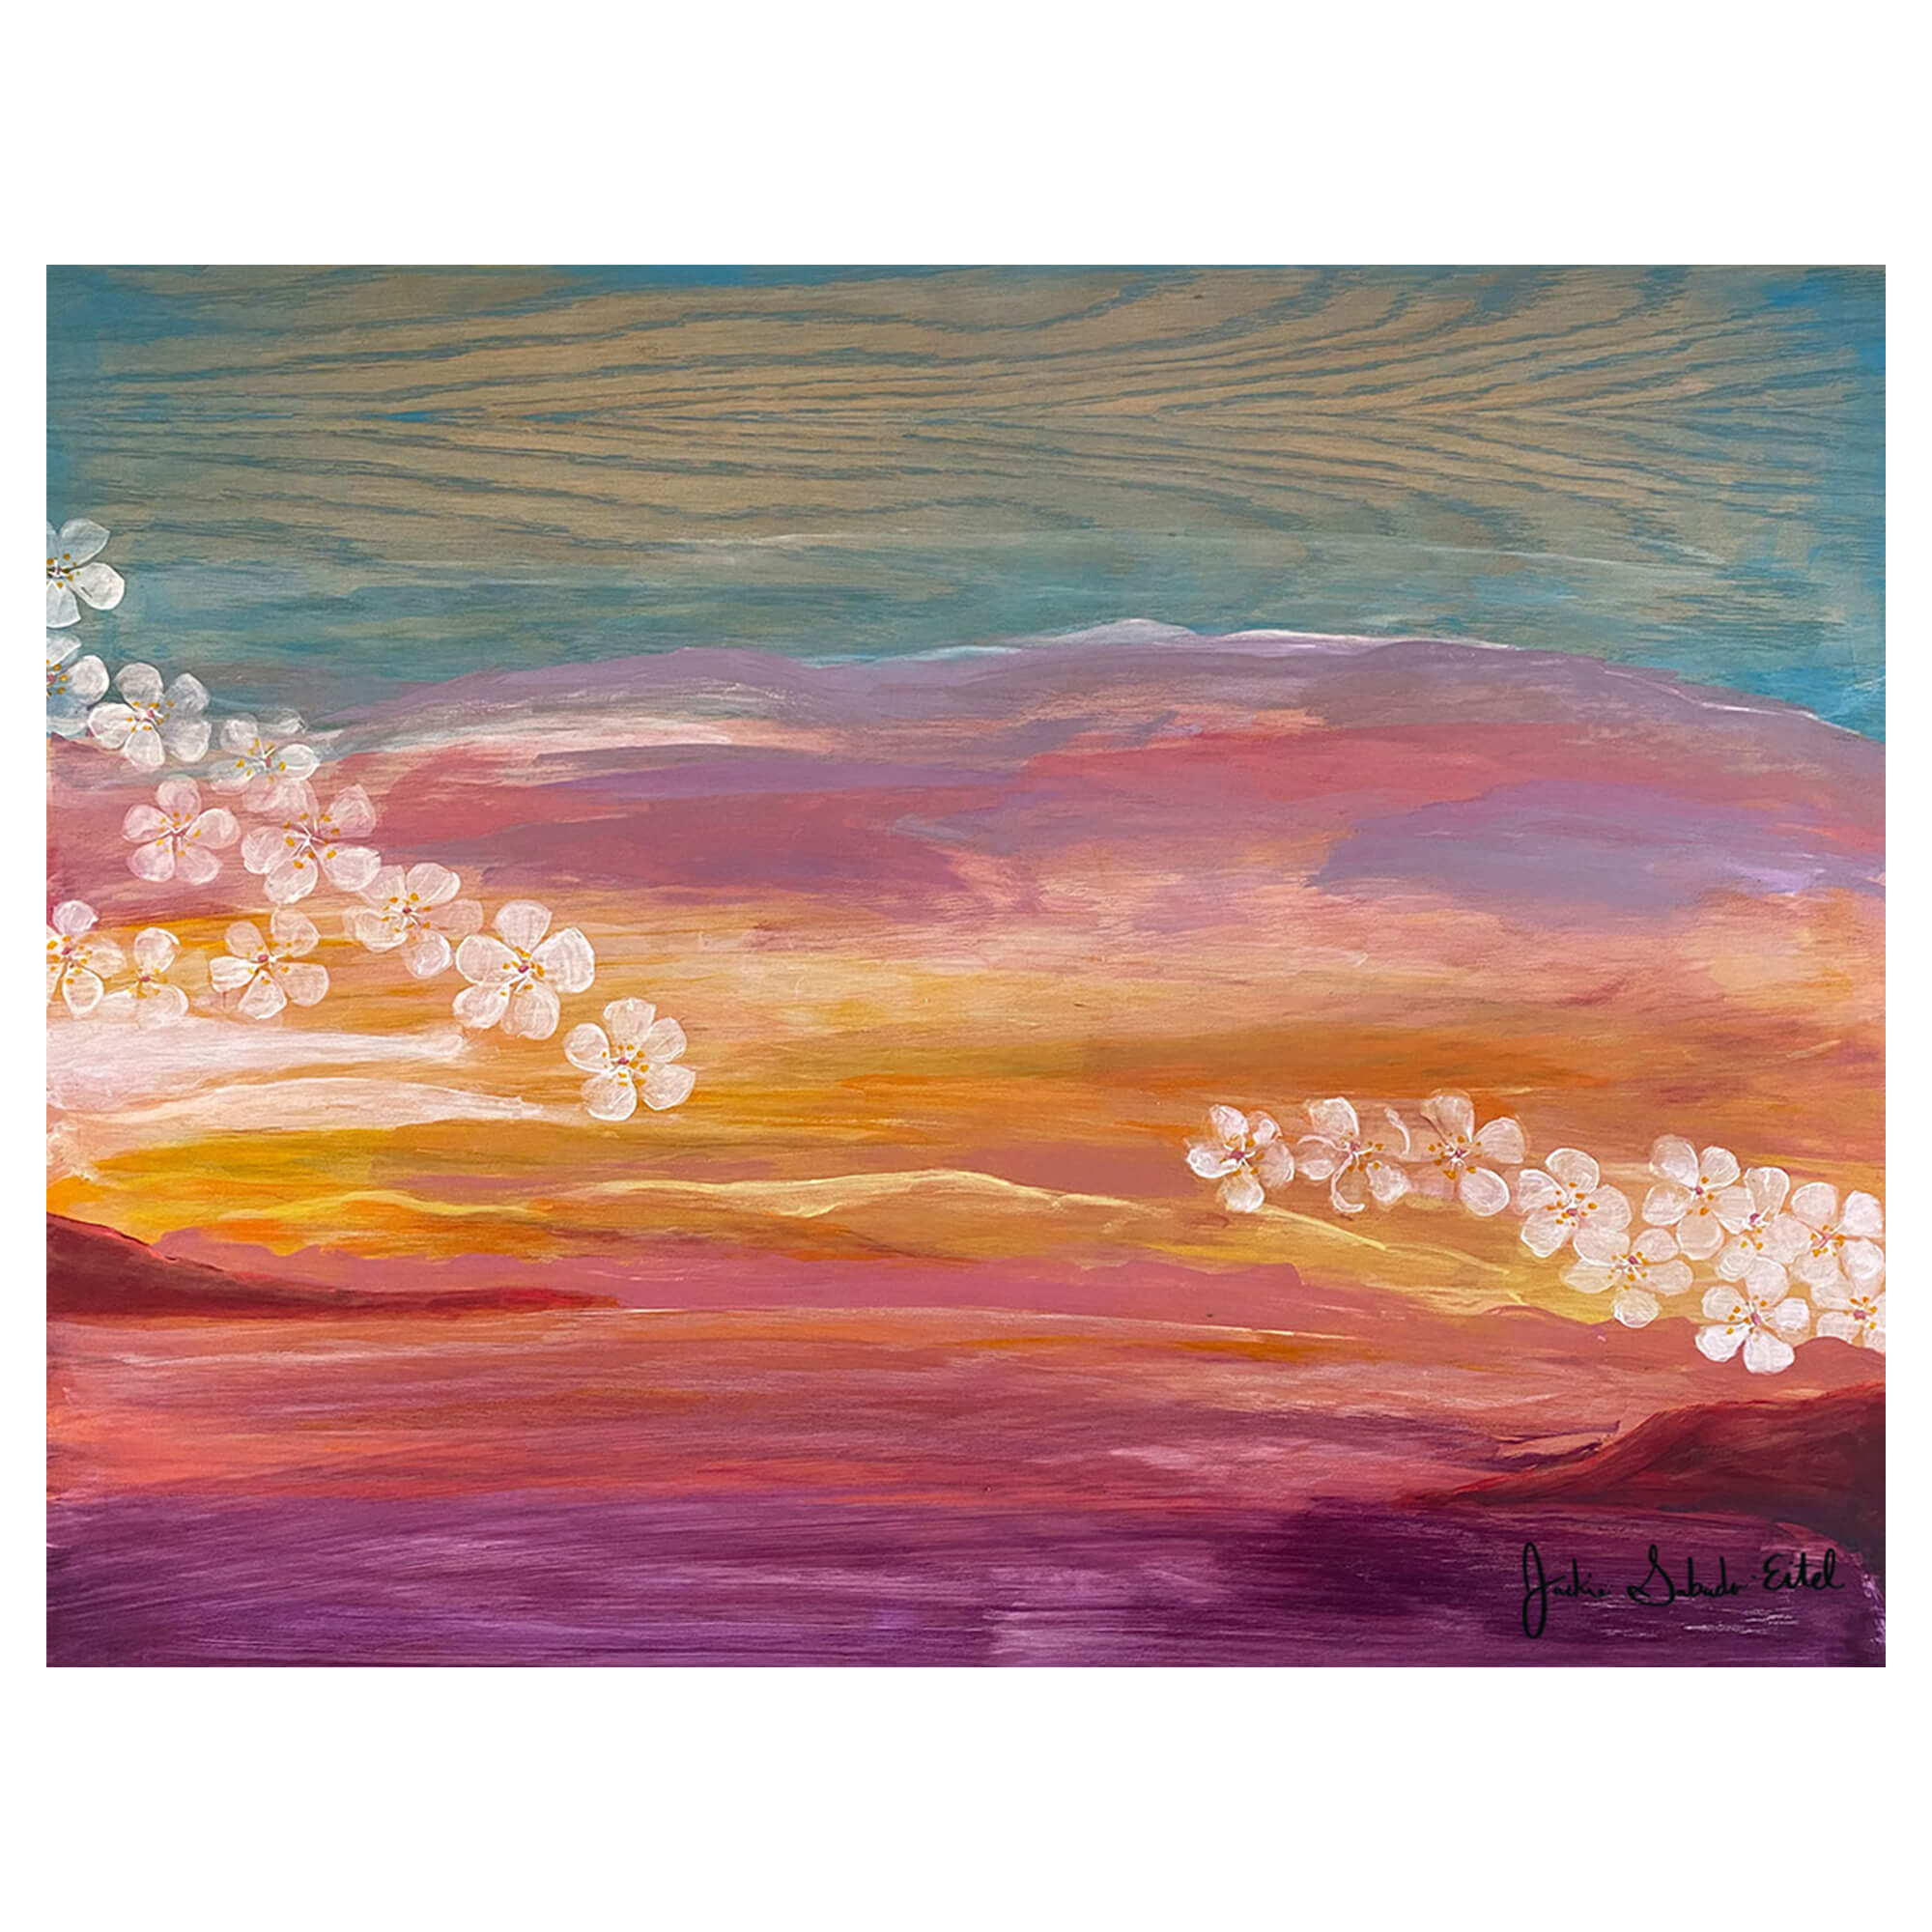 A wood print of vibrant colorful sunset and plumeria flowers by Hawaii artist Jackie Eitel